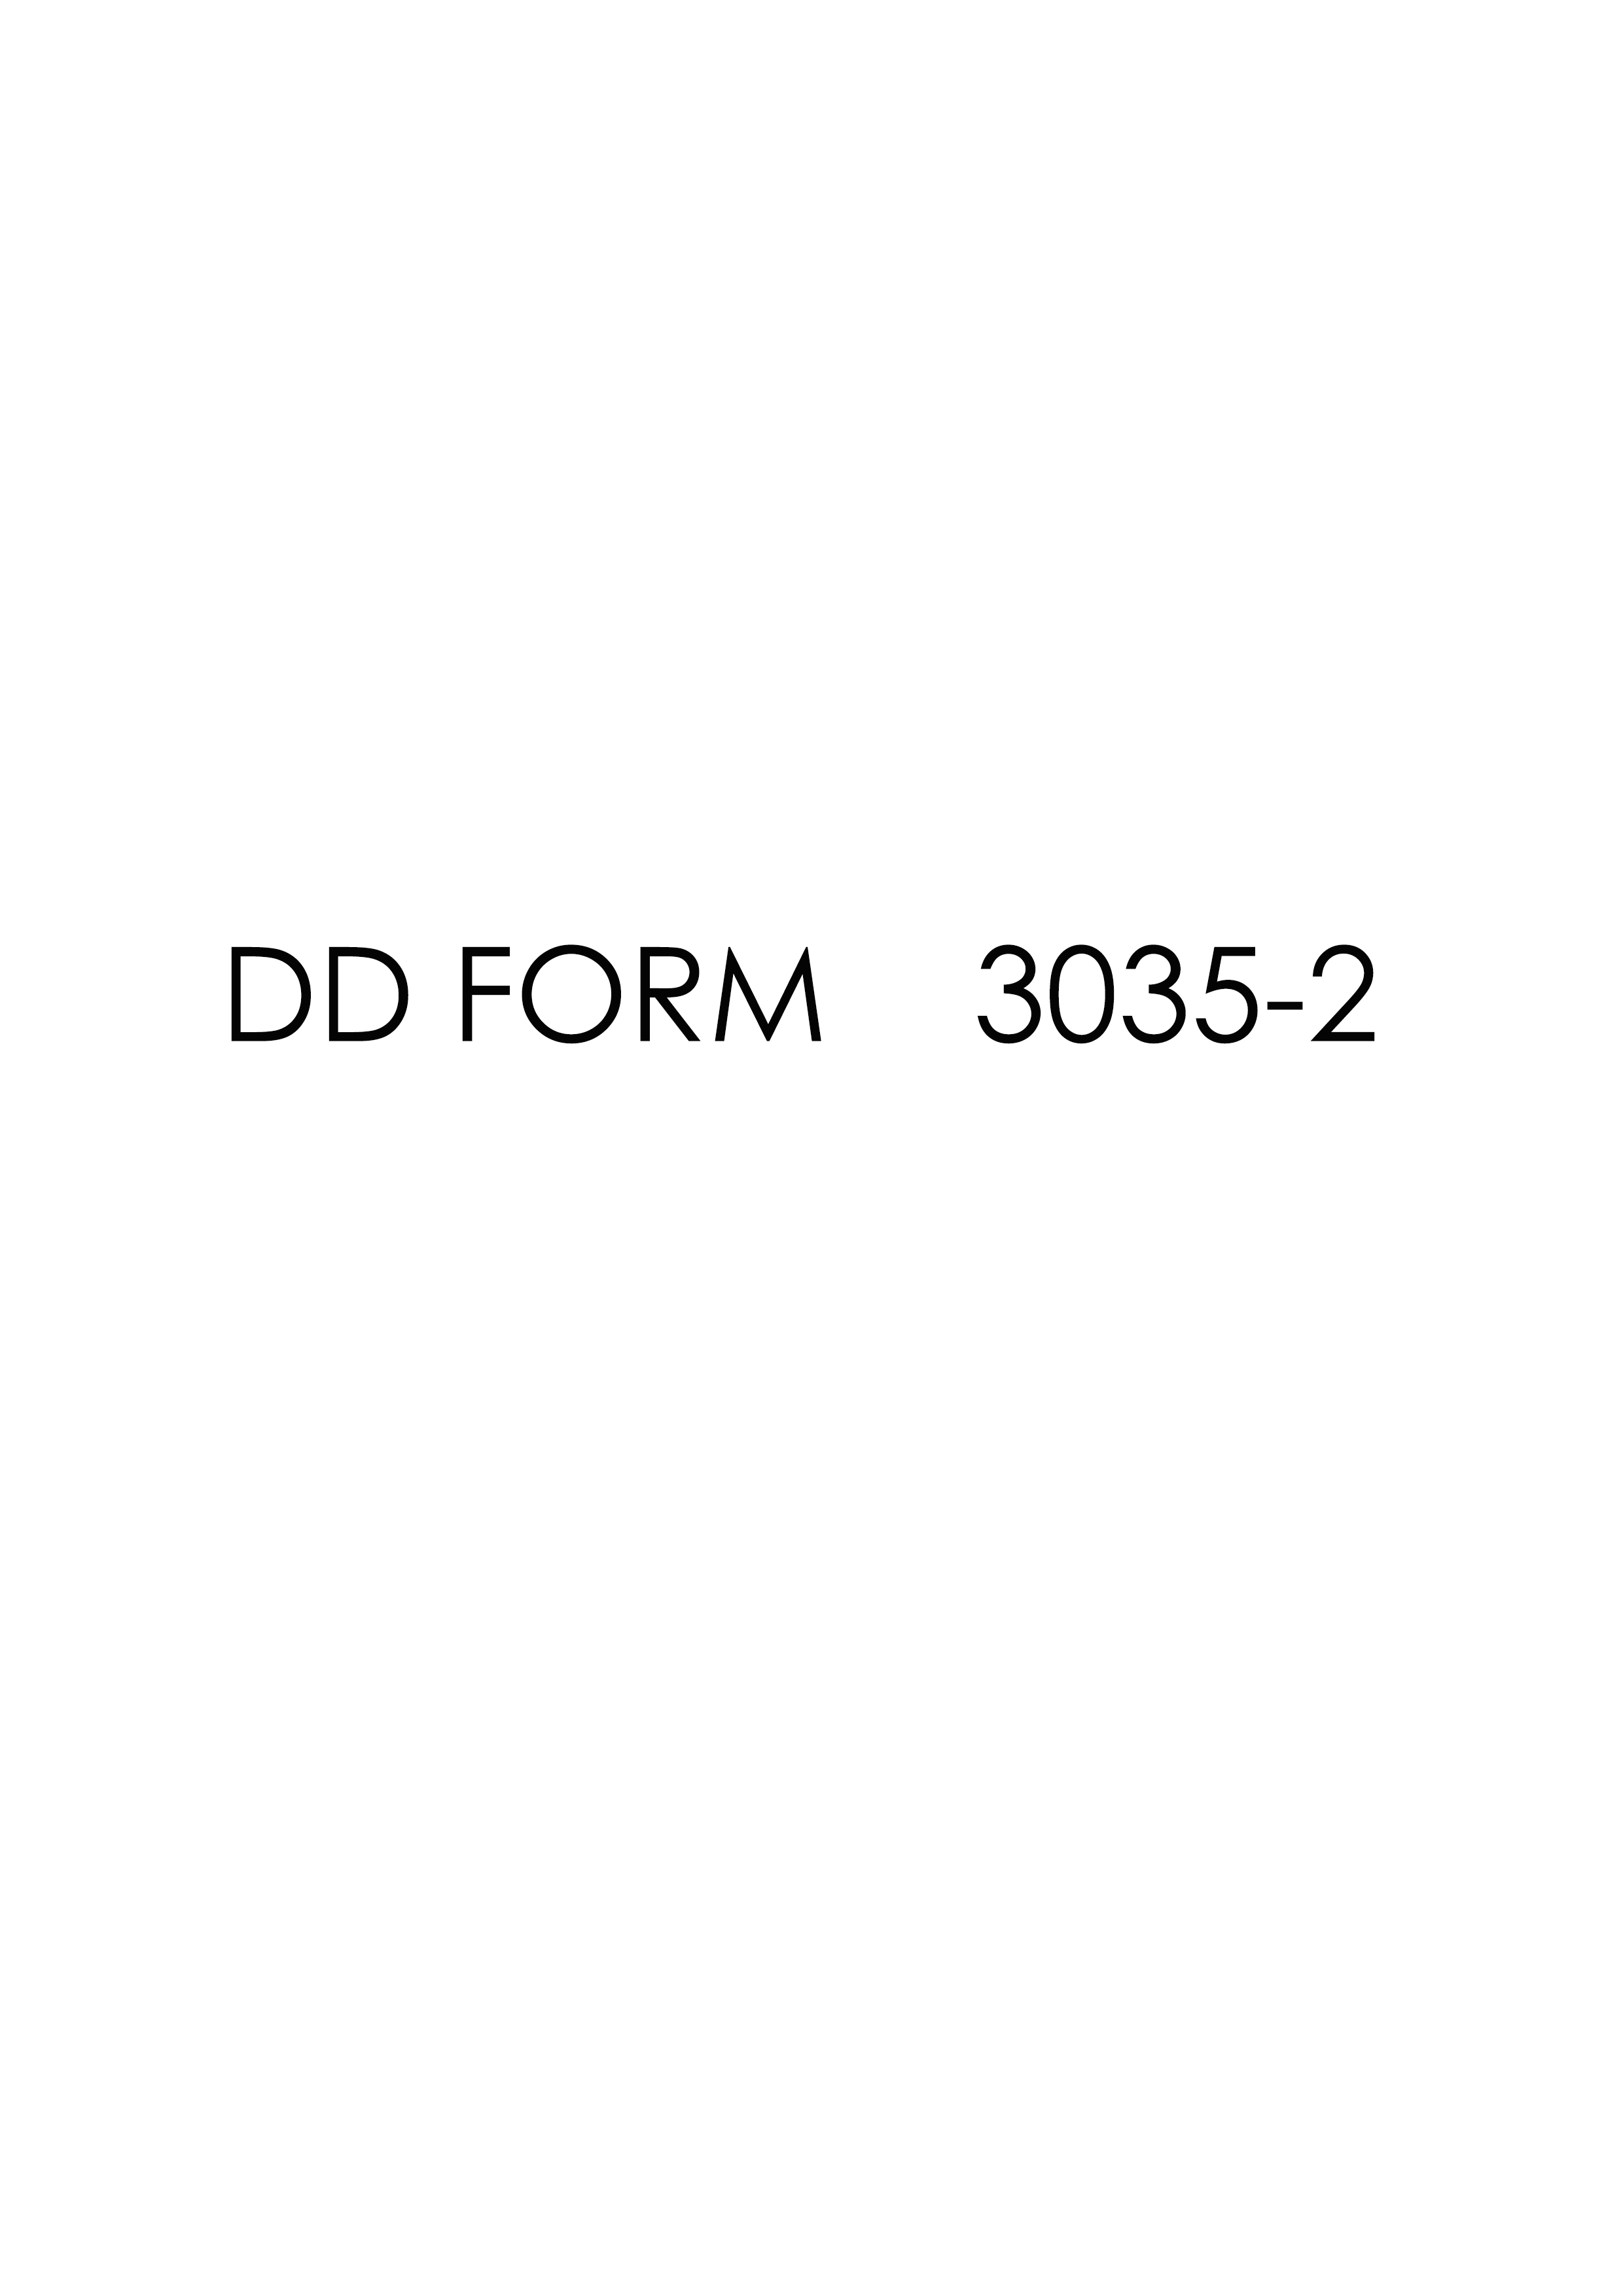 Download Fillable dd Form 3035-2